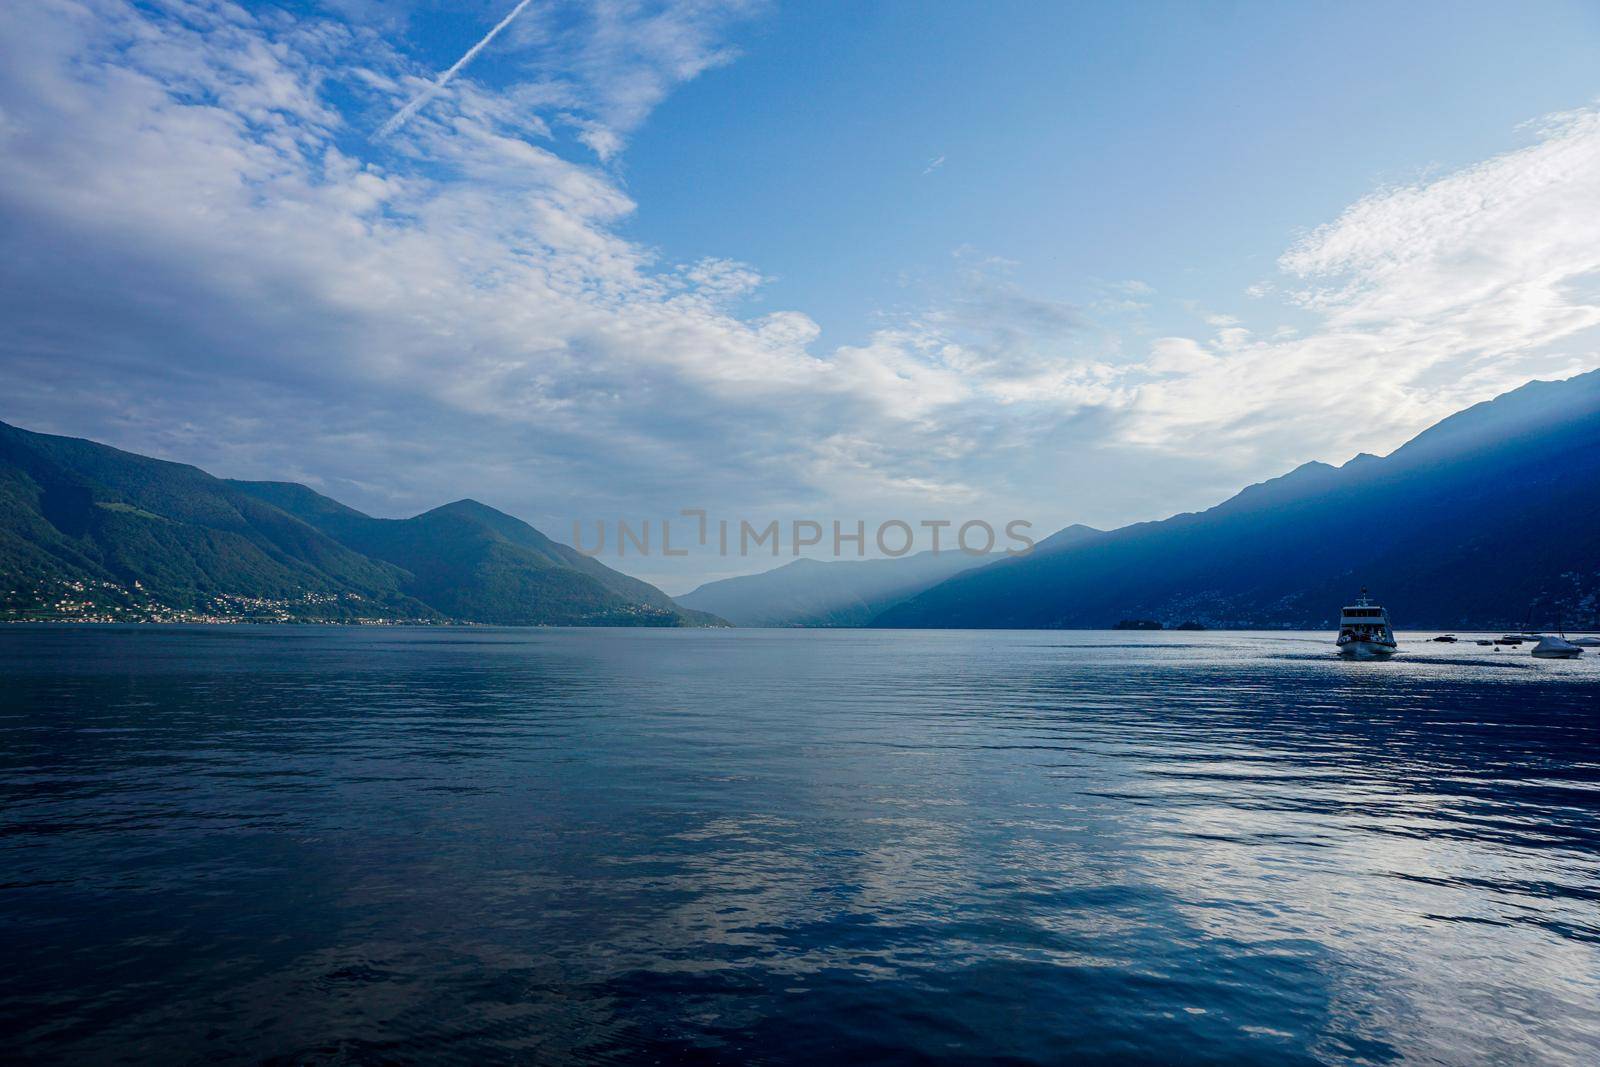 View over the Lago Maggiore from Ascona, Switzerland to Italy